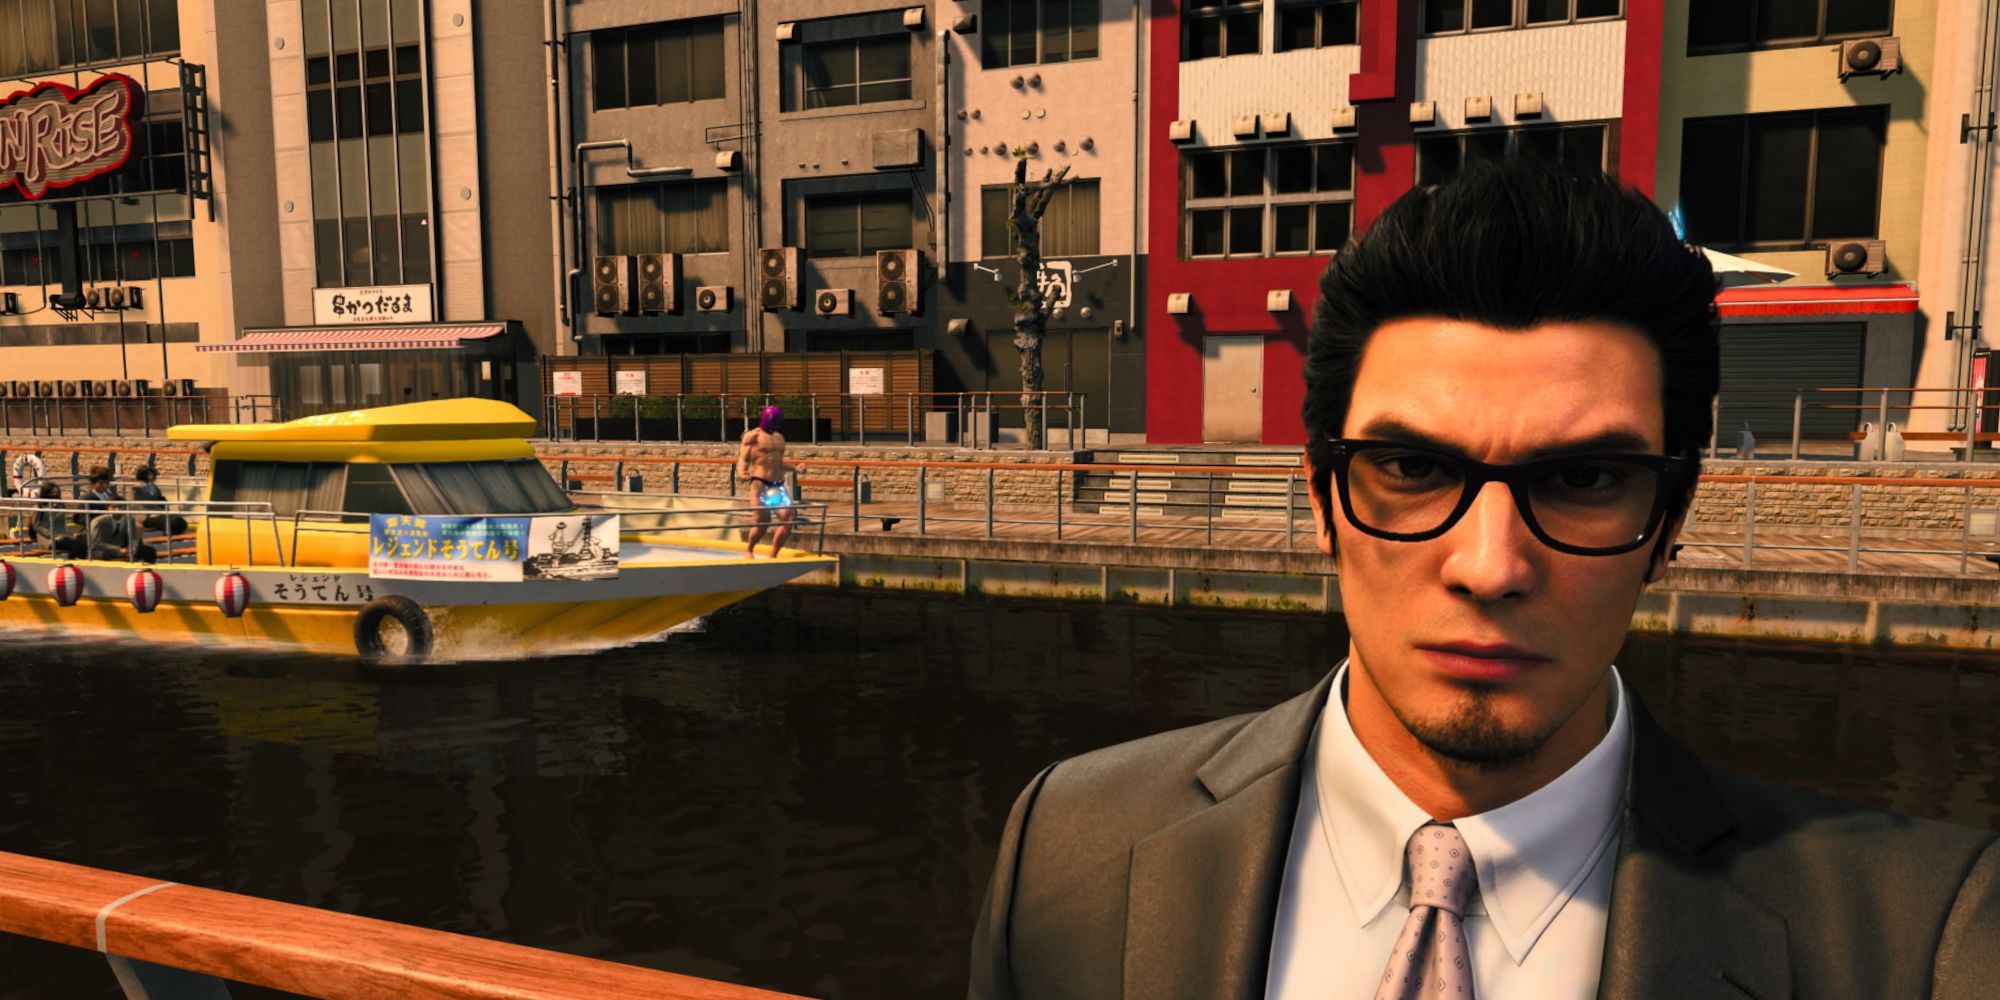 like a dragon gaiden photograph the boat guy request kiryu taking a selfie in front of the man on the boat